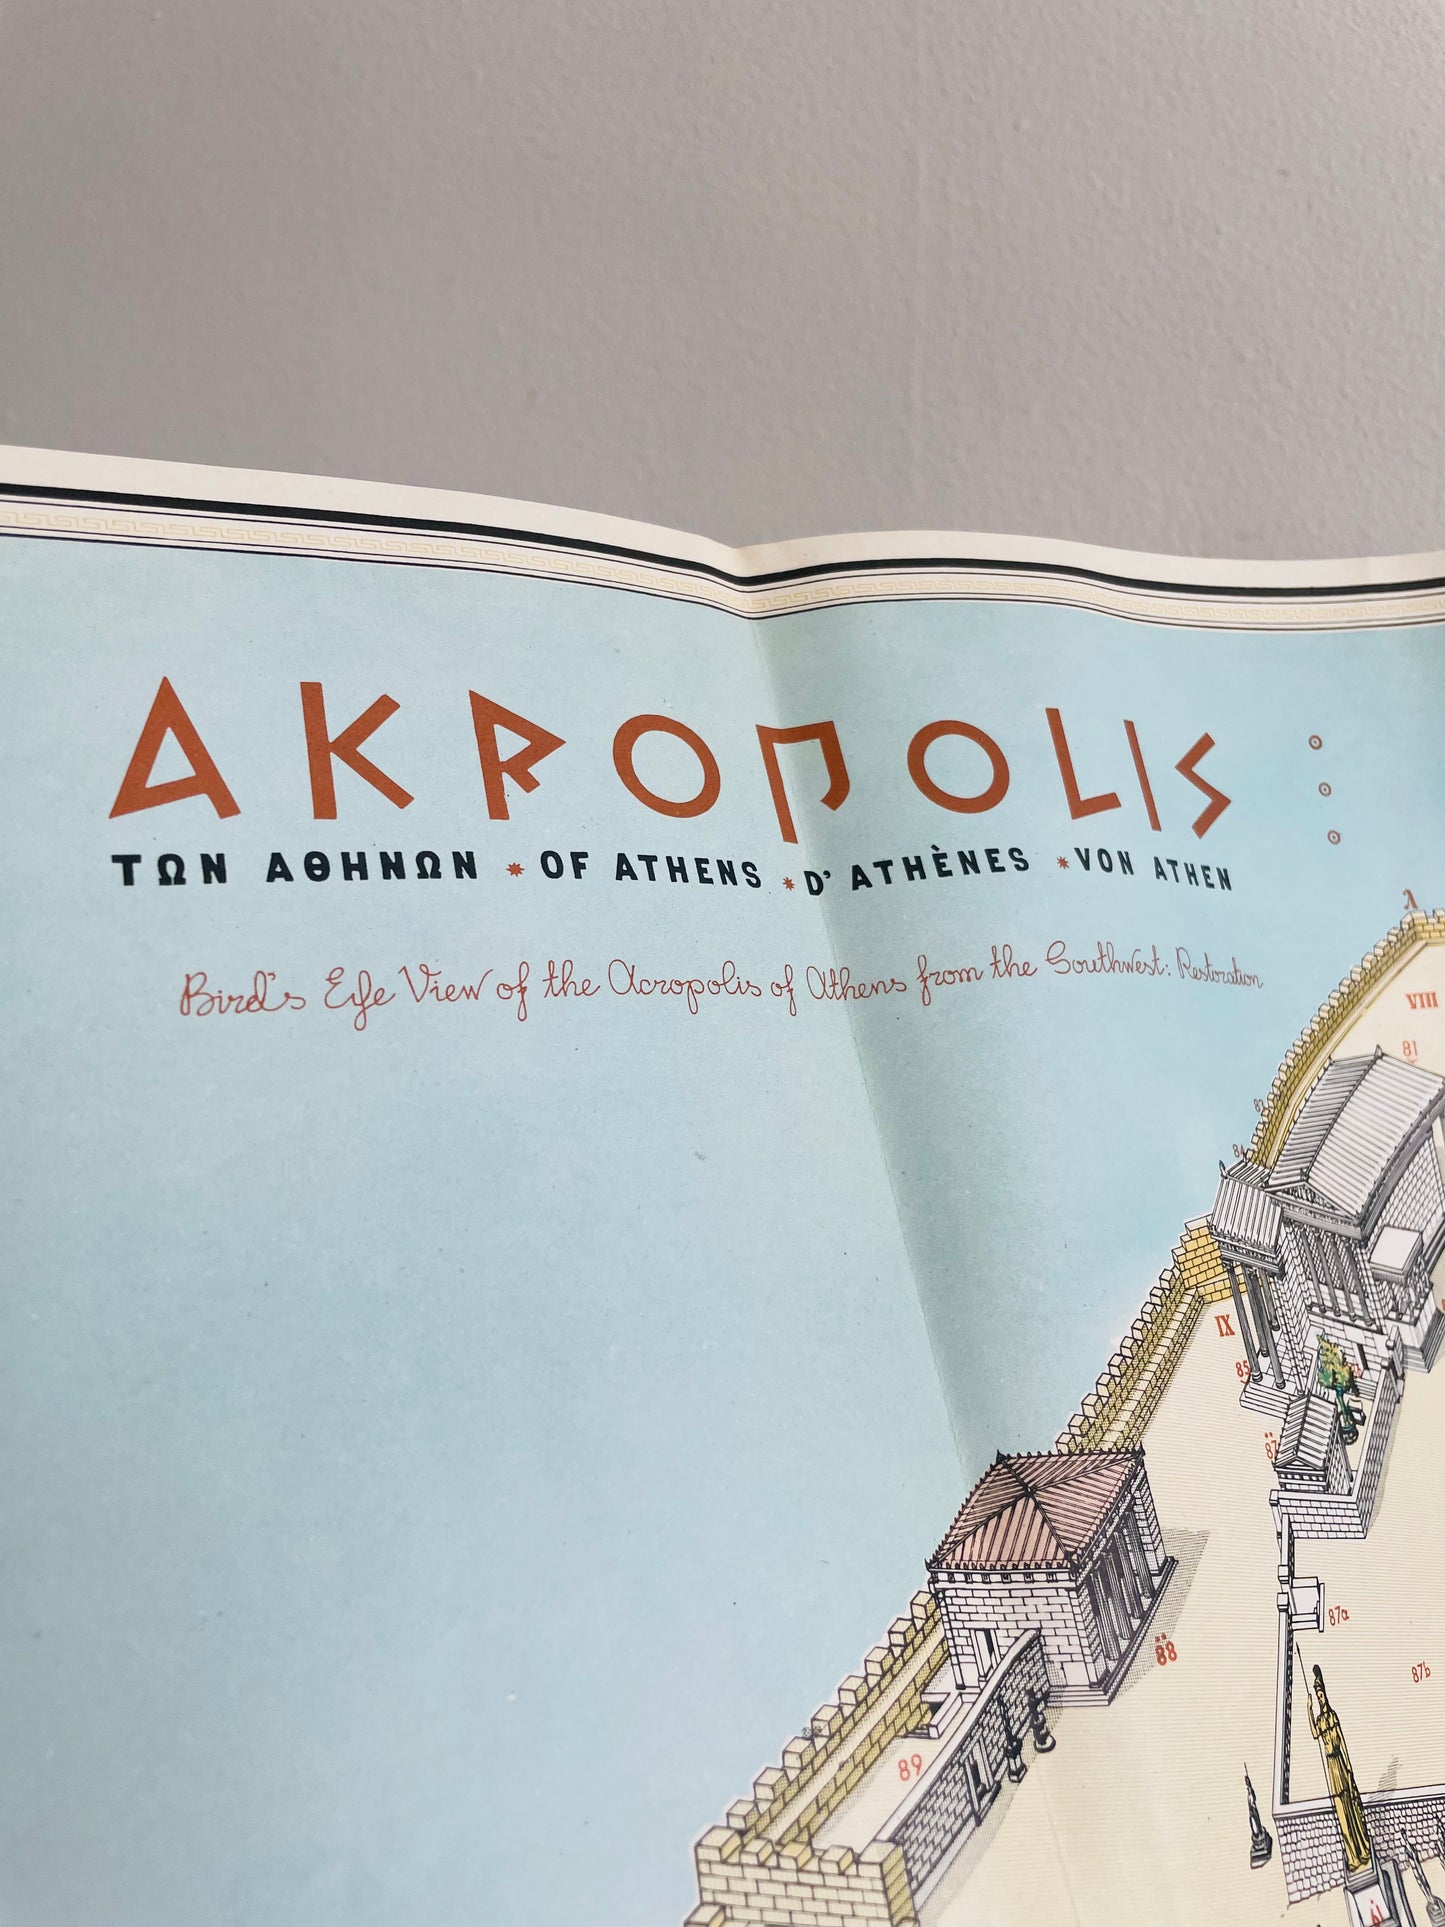 The Akropolis of Athens, Greece - Illustrations, Photos, Guide, & Fold-Out Map (1971)